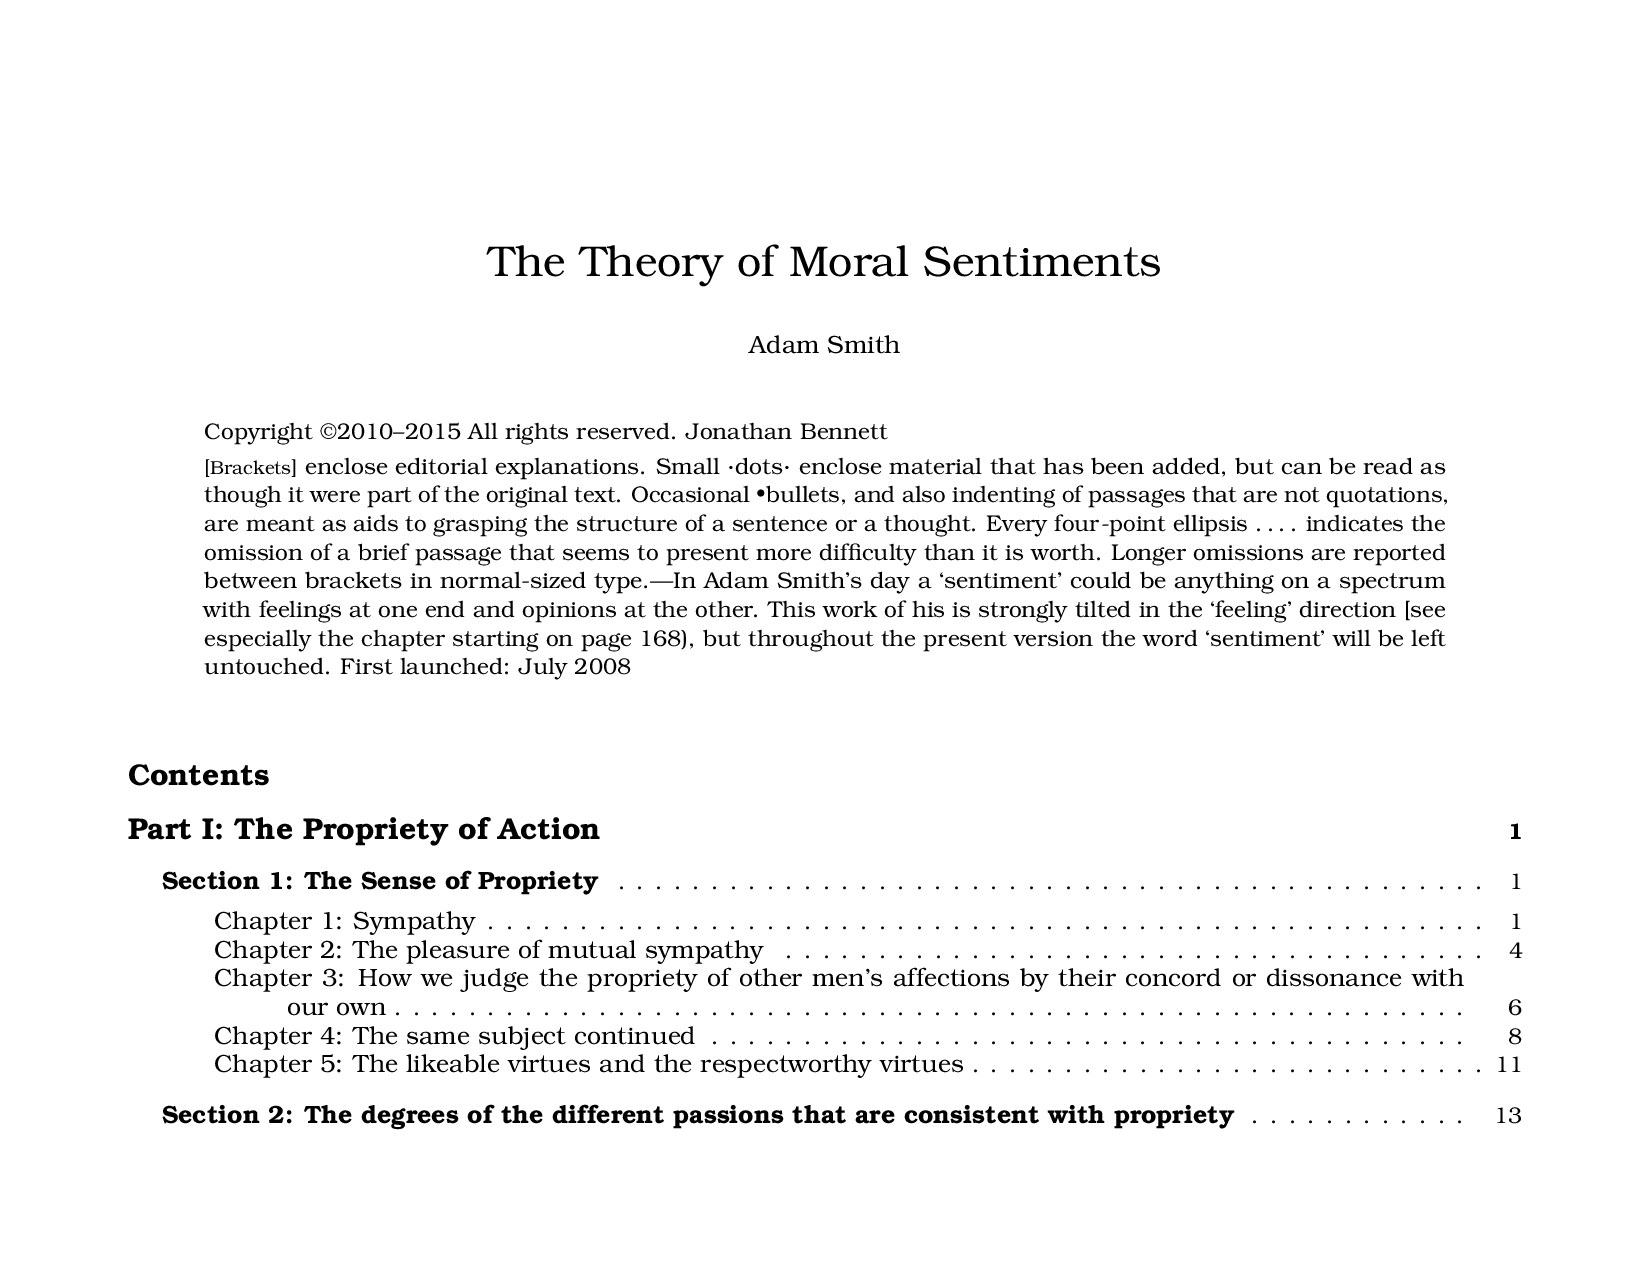 Adam Smith - The Theory of Moral Sentiments